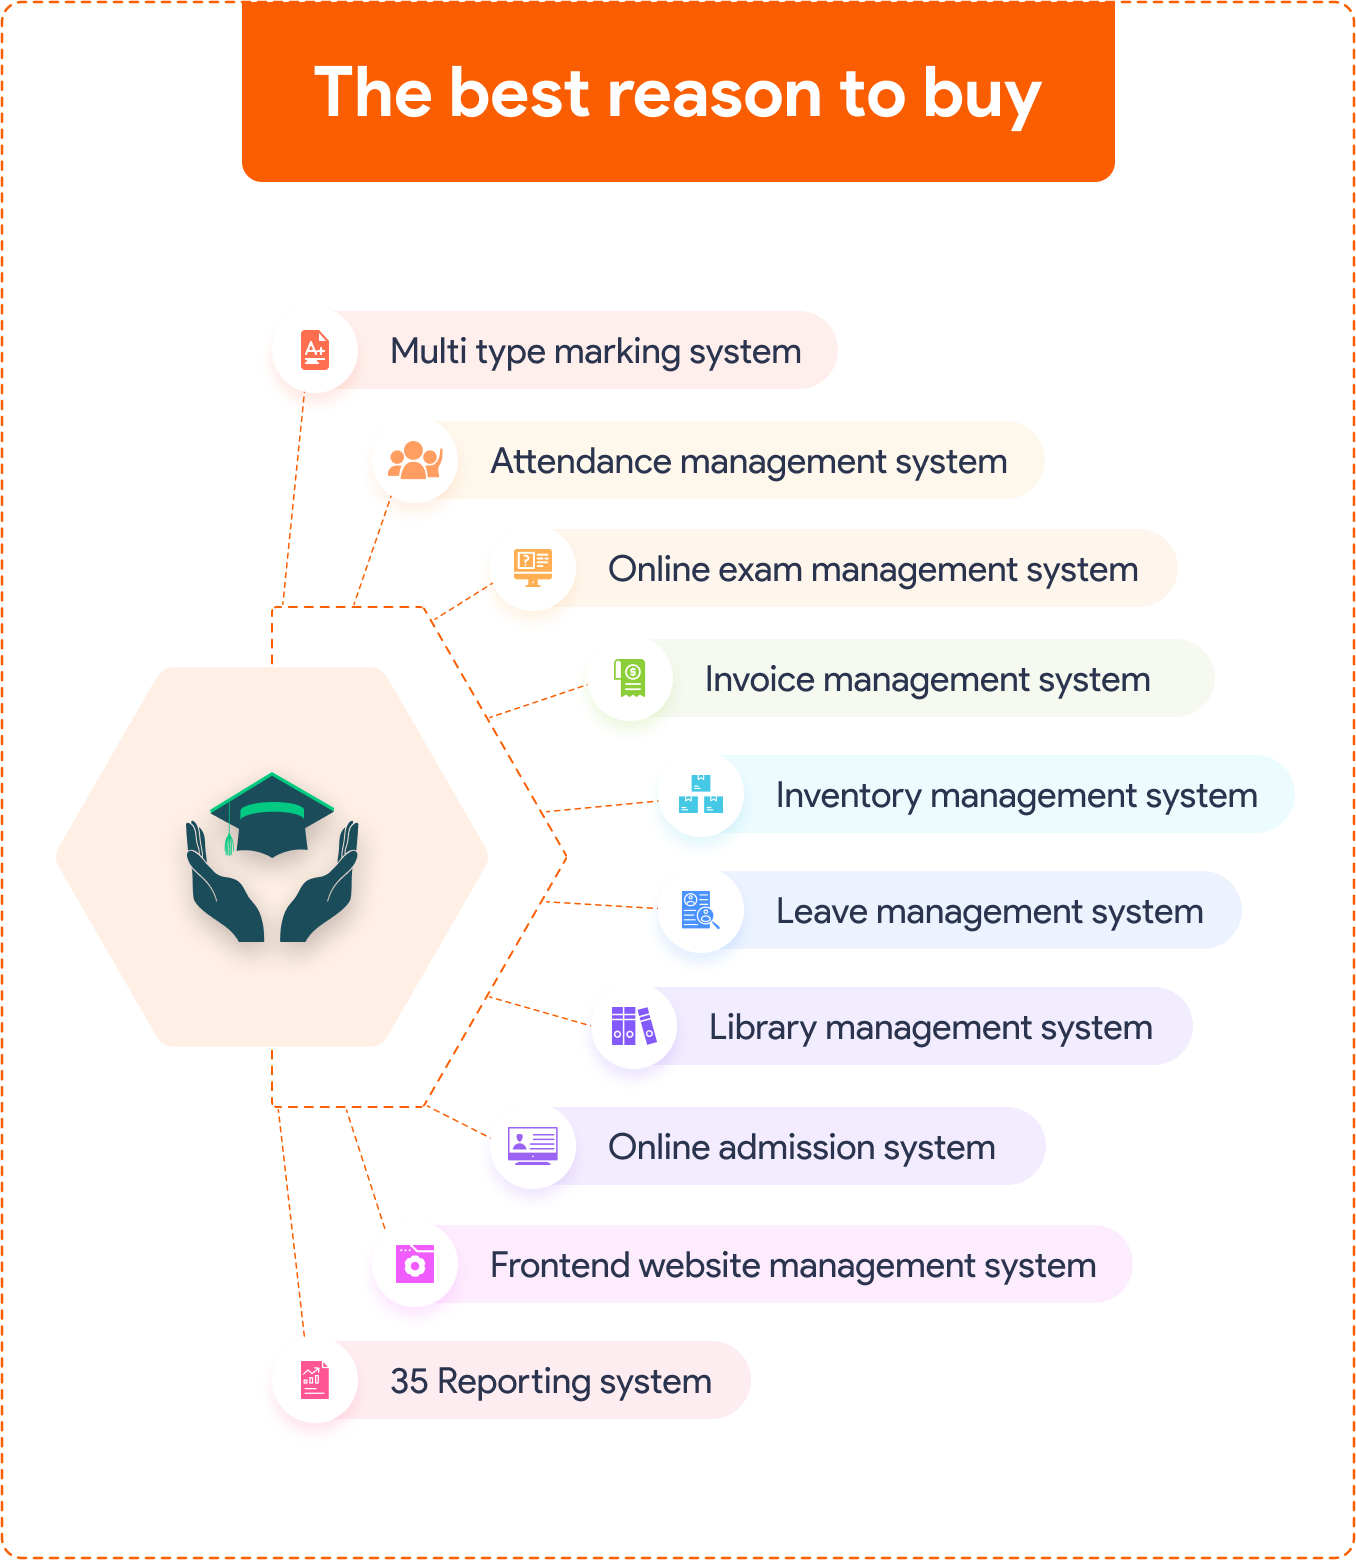 iNiLabs School Management System Most Featured and Trusted School Management System Best reasons to buy